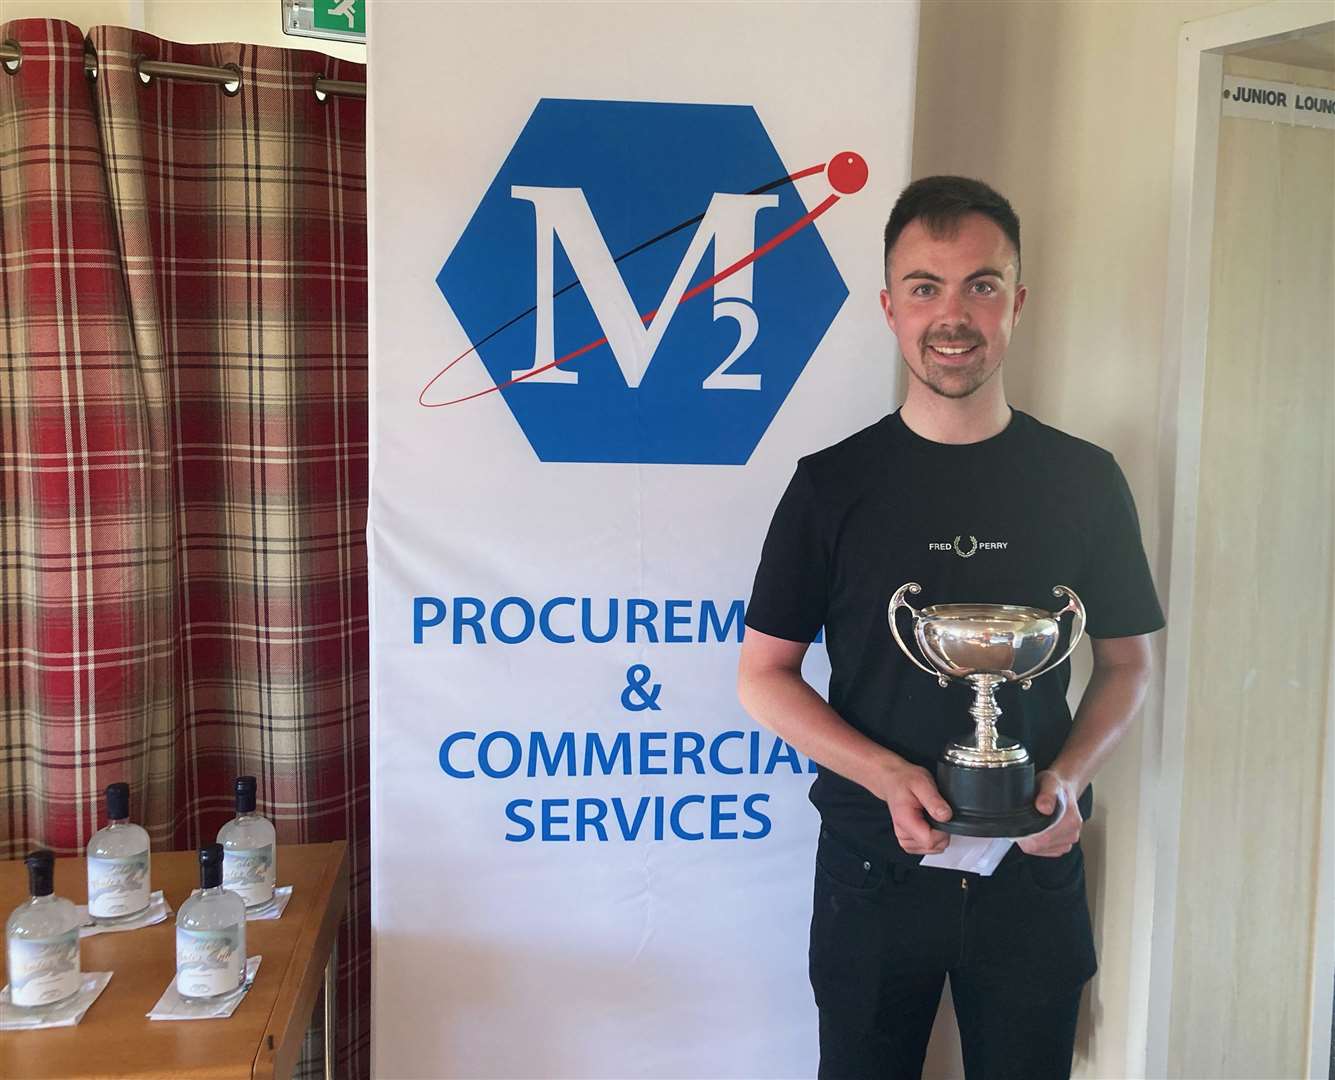 Gregor Munro, winner of the scratch prize in the Reay Open sponsored by M2 Procurement and Commercial Services.